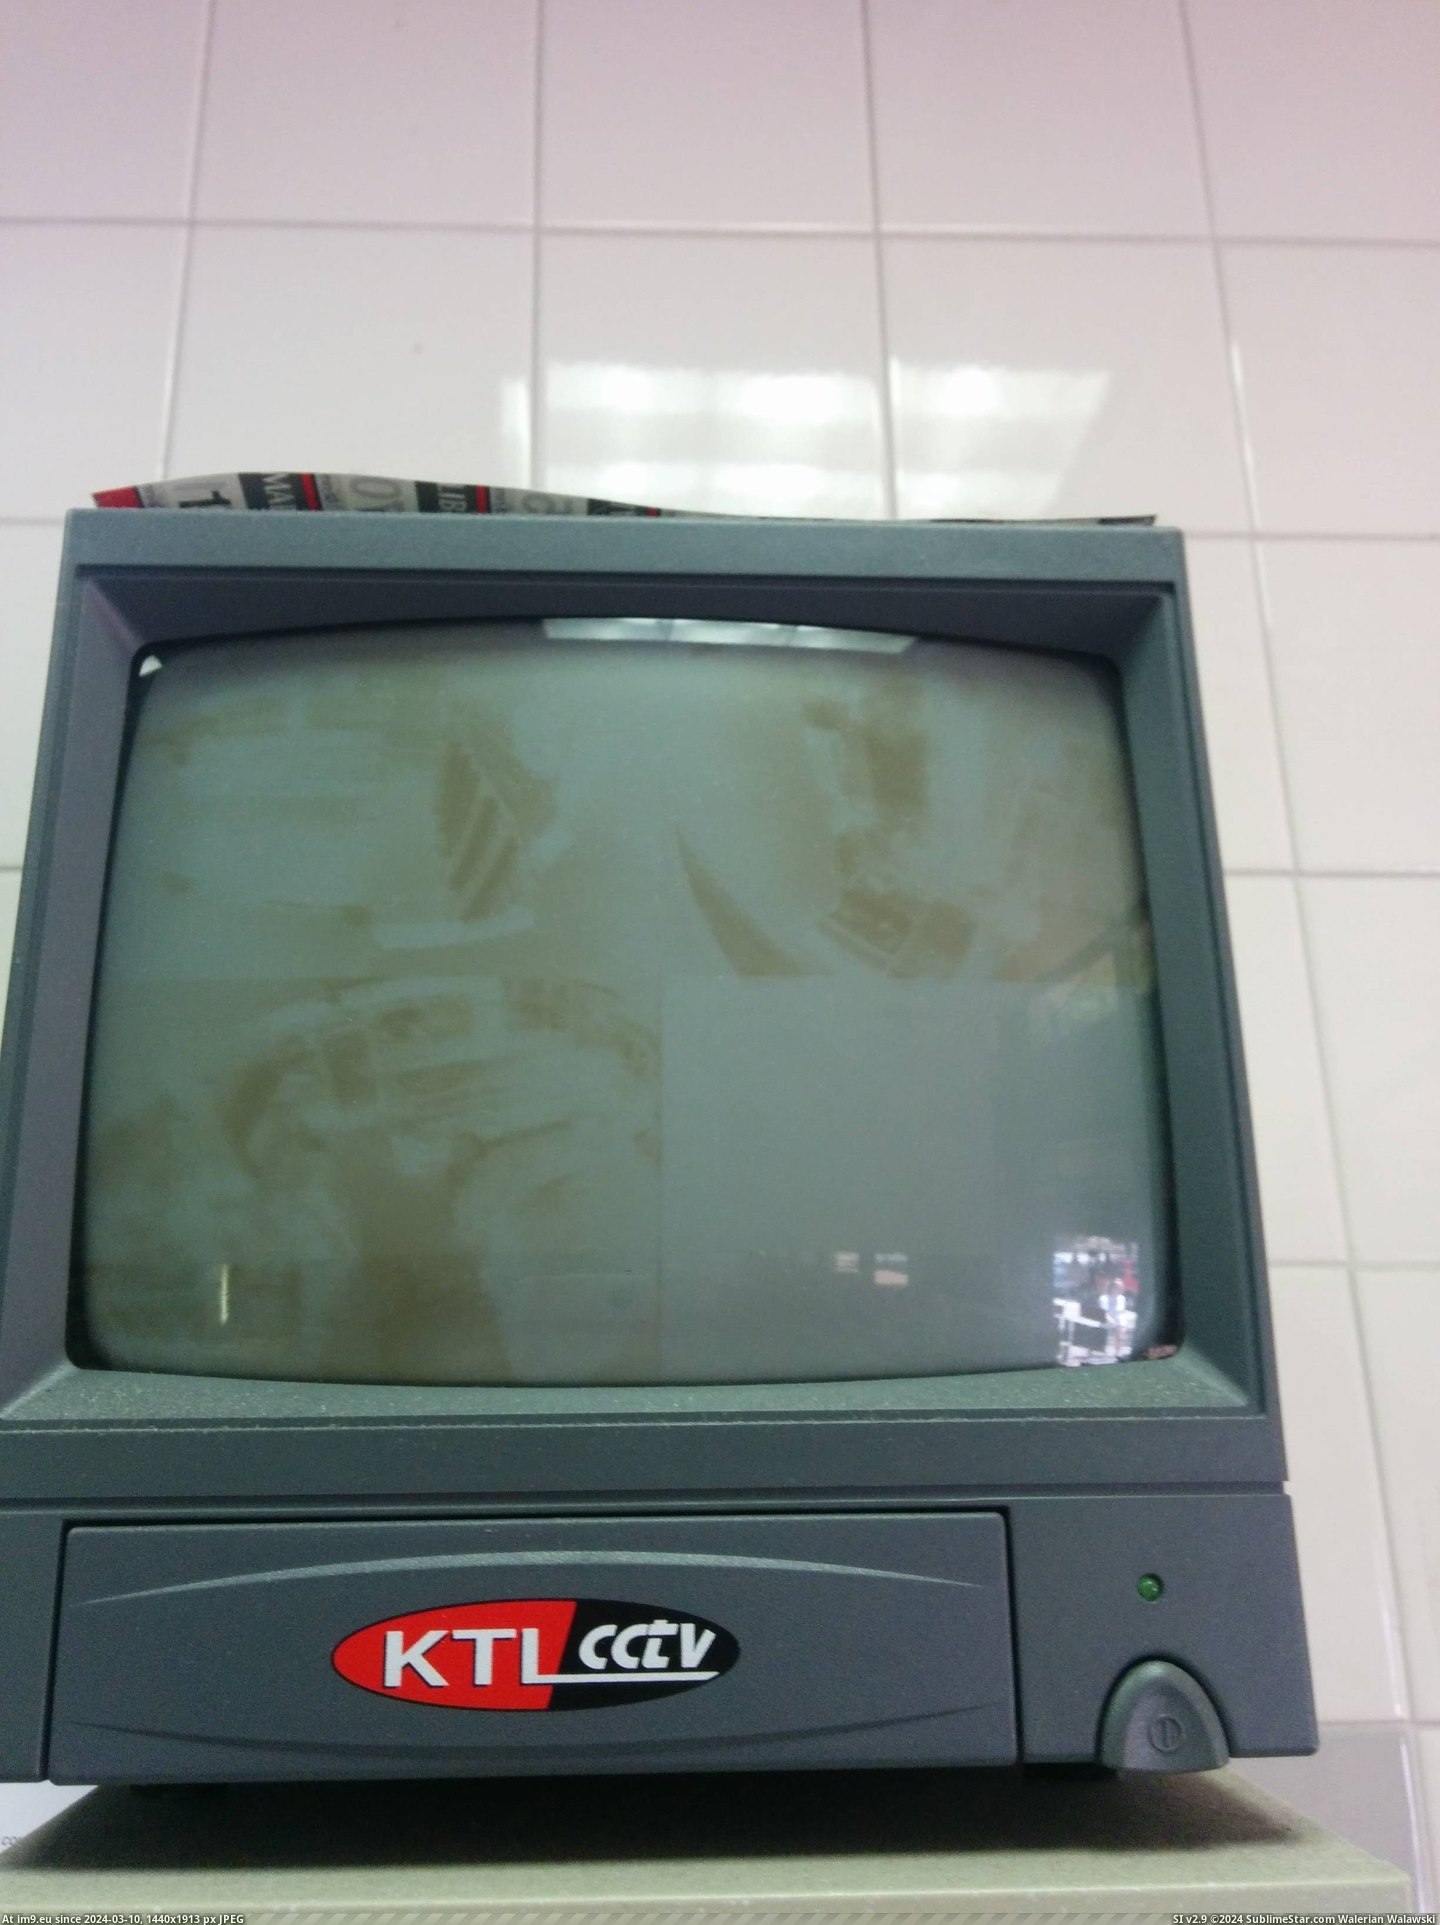 #Images #Long #Security #Burned #Store #Camera [Mildlyinteresting] This security camera TV has been on so long the images of the store have been burned in. Pic. (Изображение из альбом My r/MILDLYINTERESTING favs))